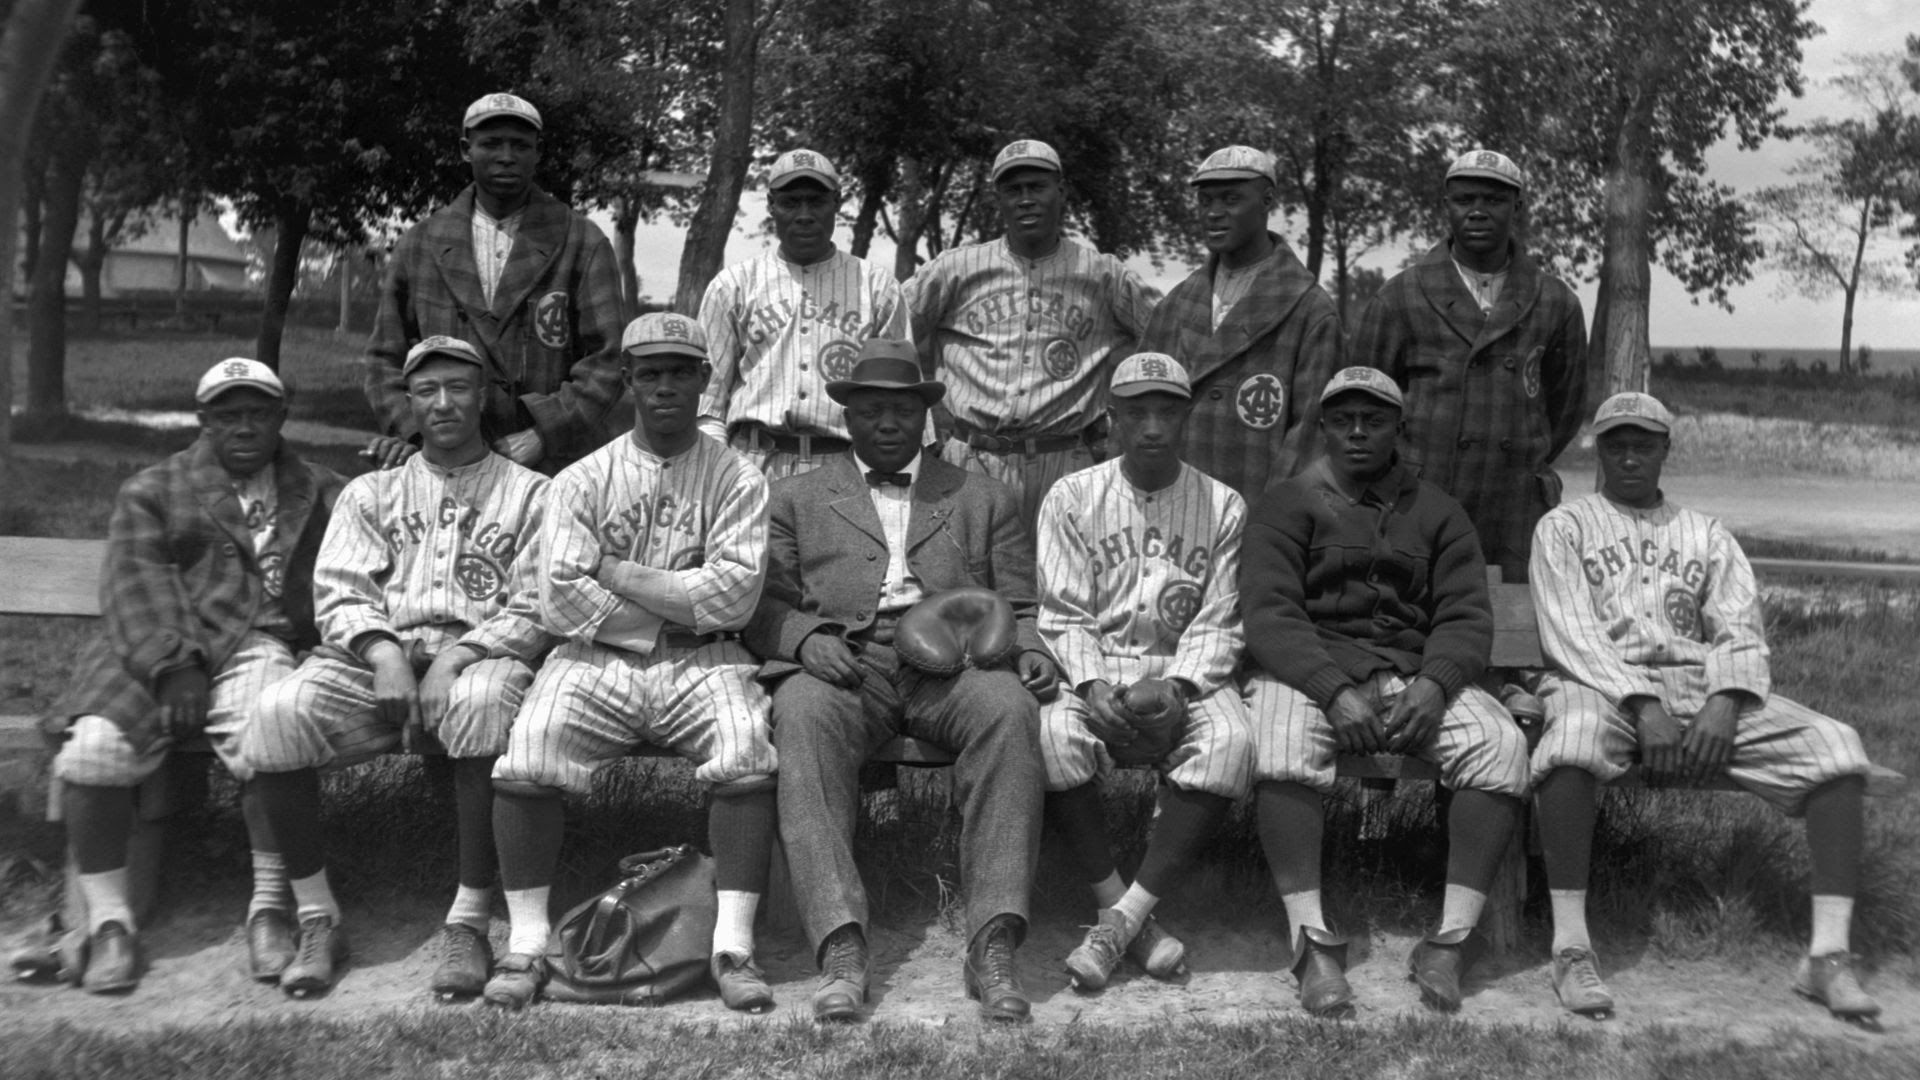 Rube Foster (center) and the Chicago American Giants